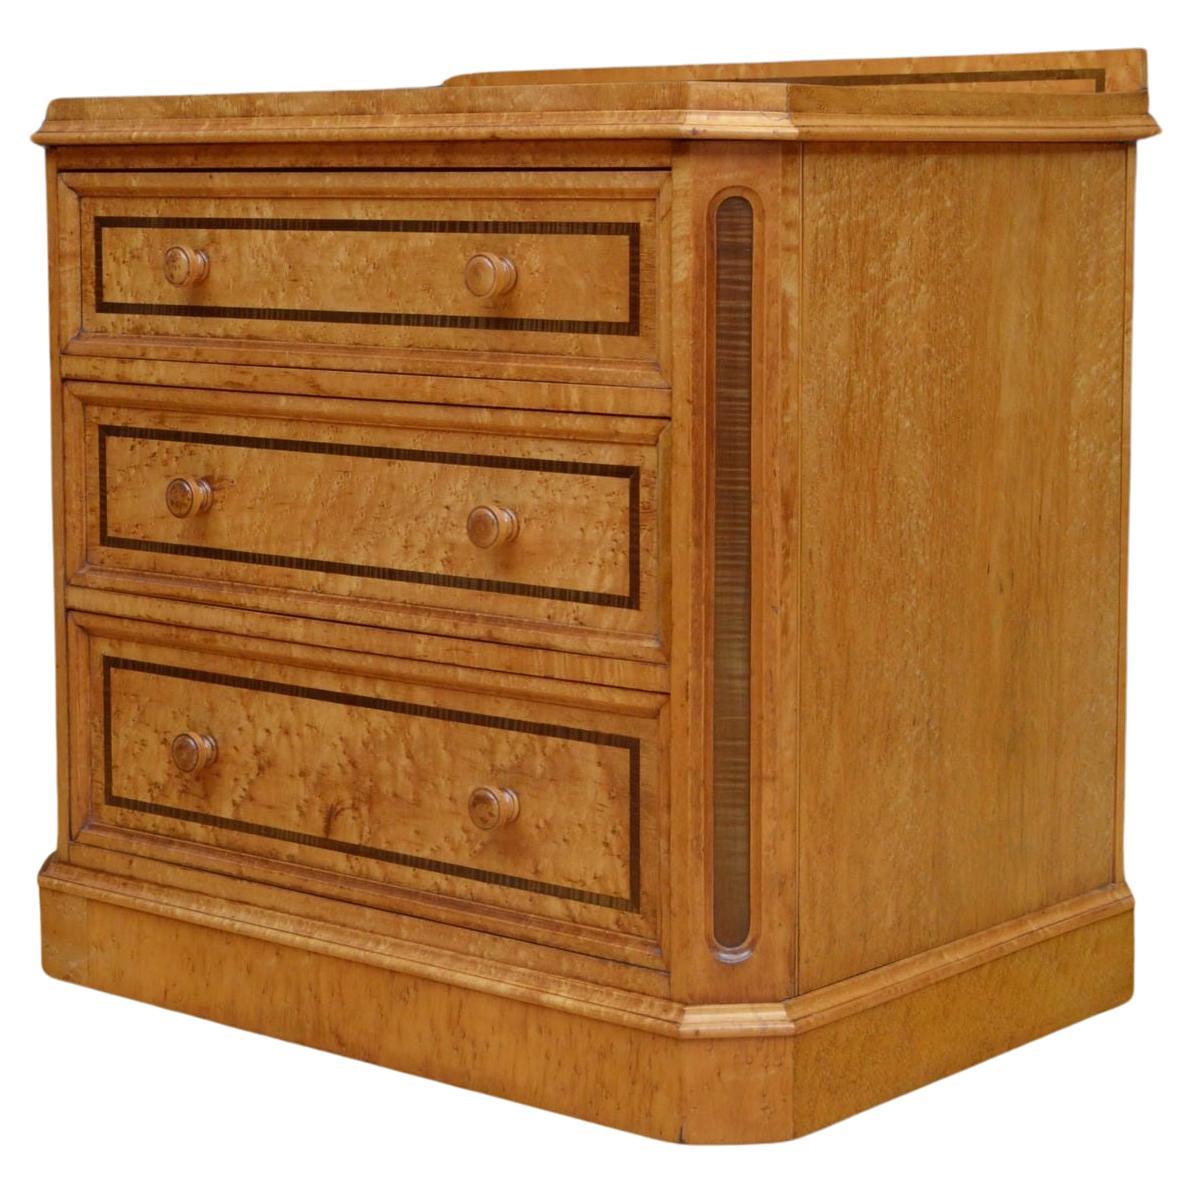 Victorian Bird's Eye Maple Chest of Drawers For Sale